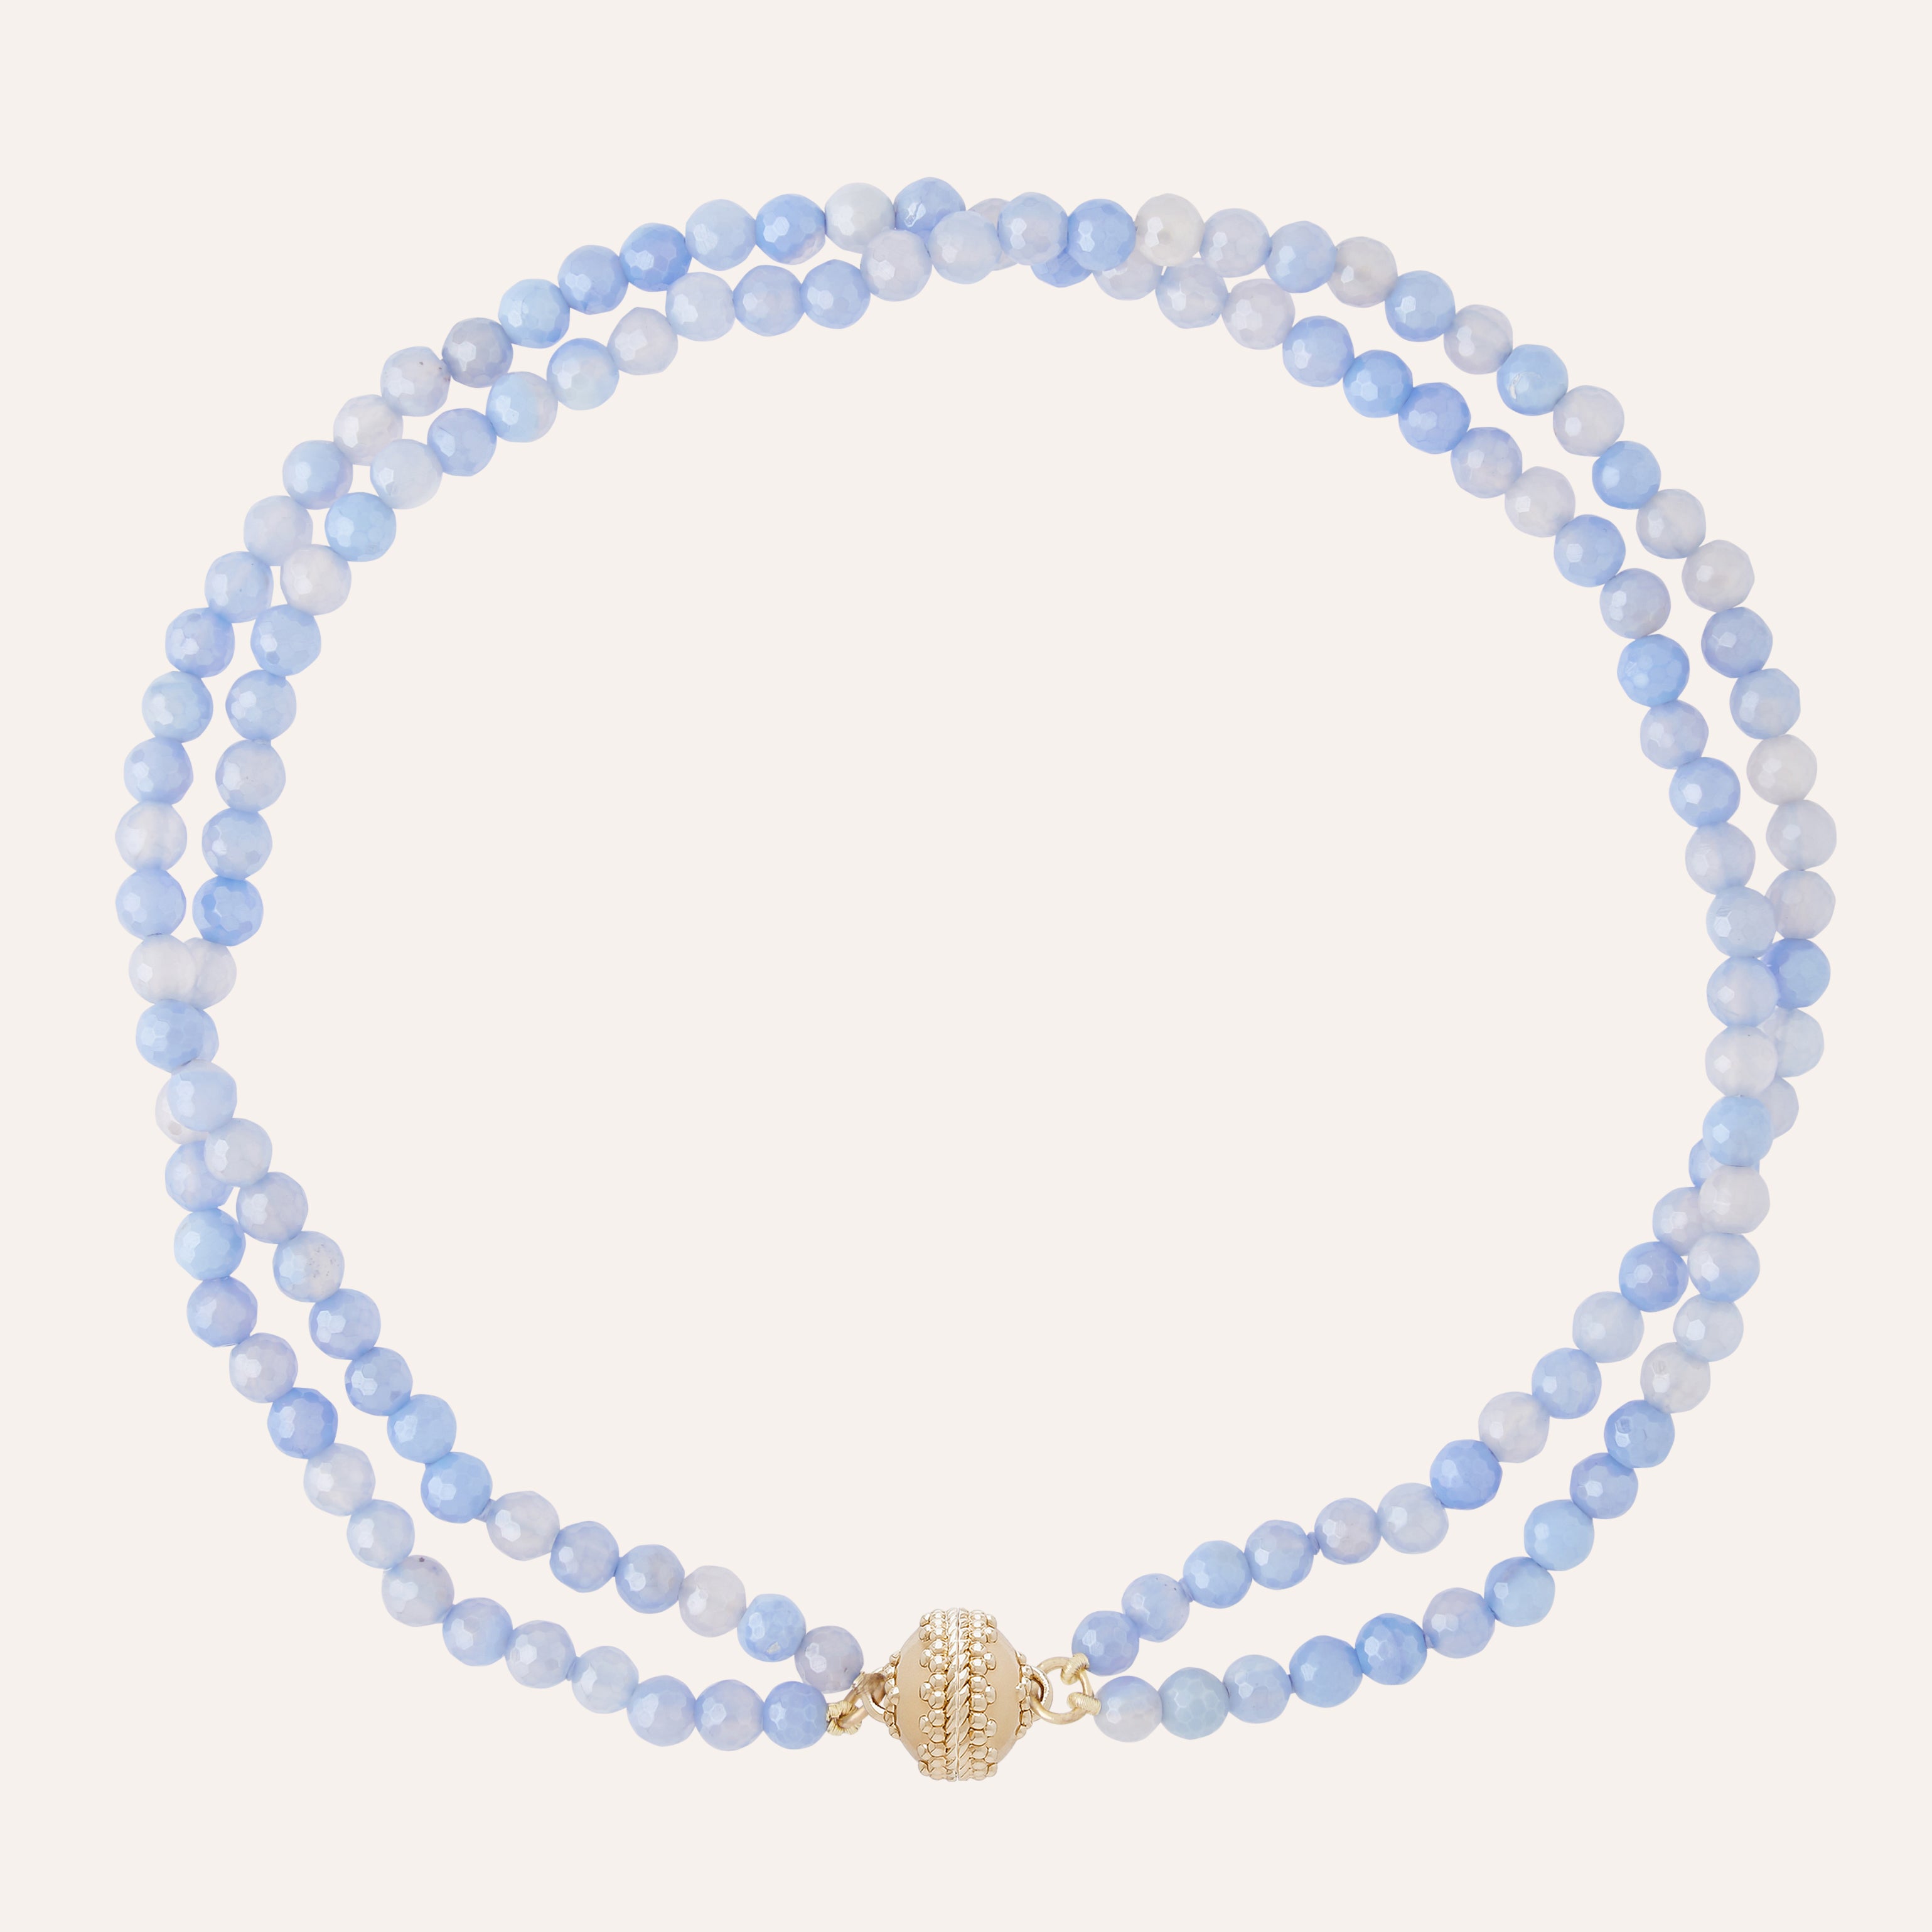 Nancy Faceted Coated Blue Lace Agate 6mm Double Strand Necklace